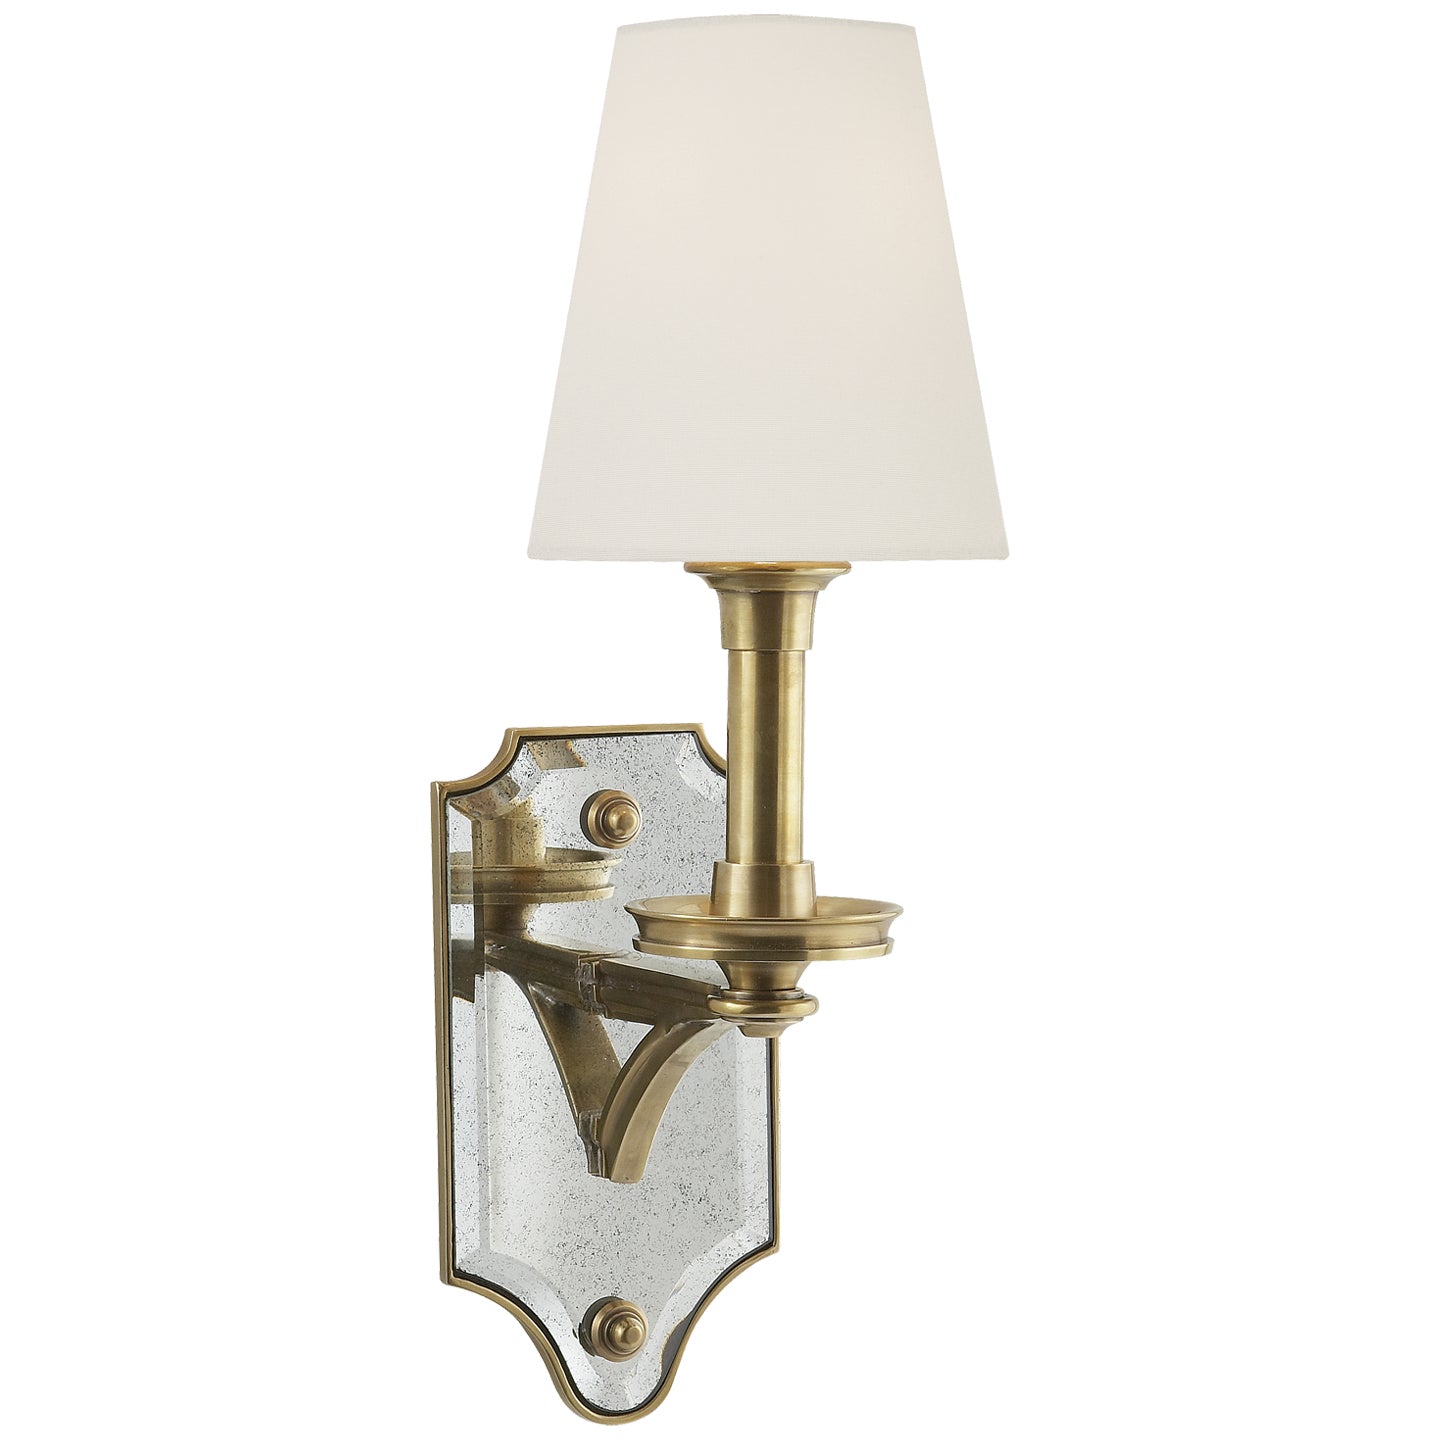 Visual Comfort Signature - TOB 2330HAB-L - One Light Wall Sconce - Verona - Hand-Rubbed Antique Brass